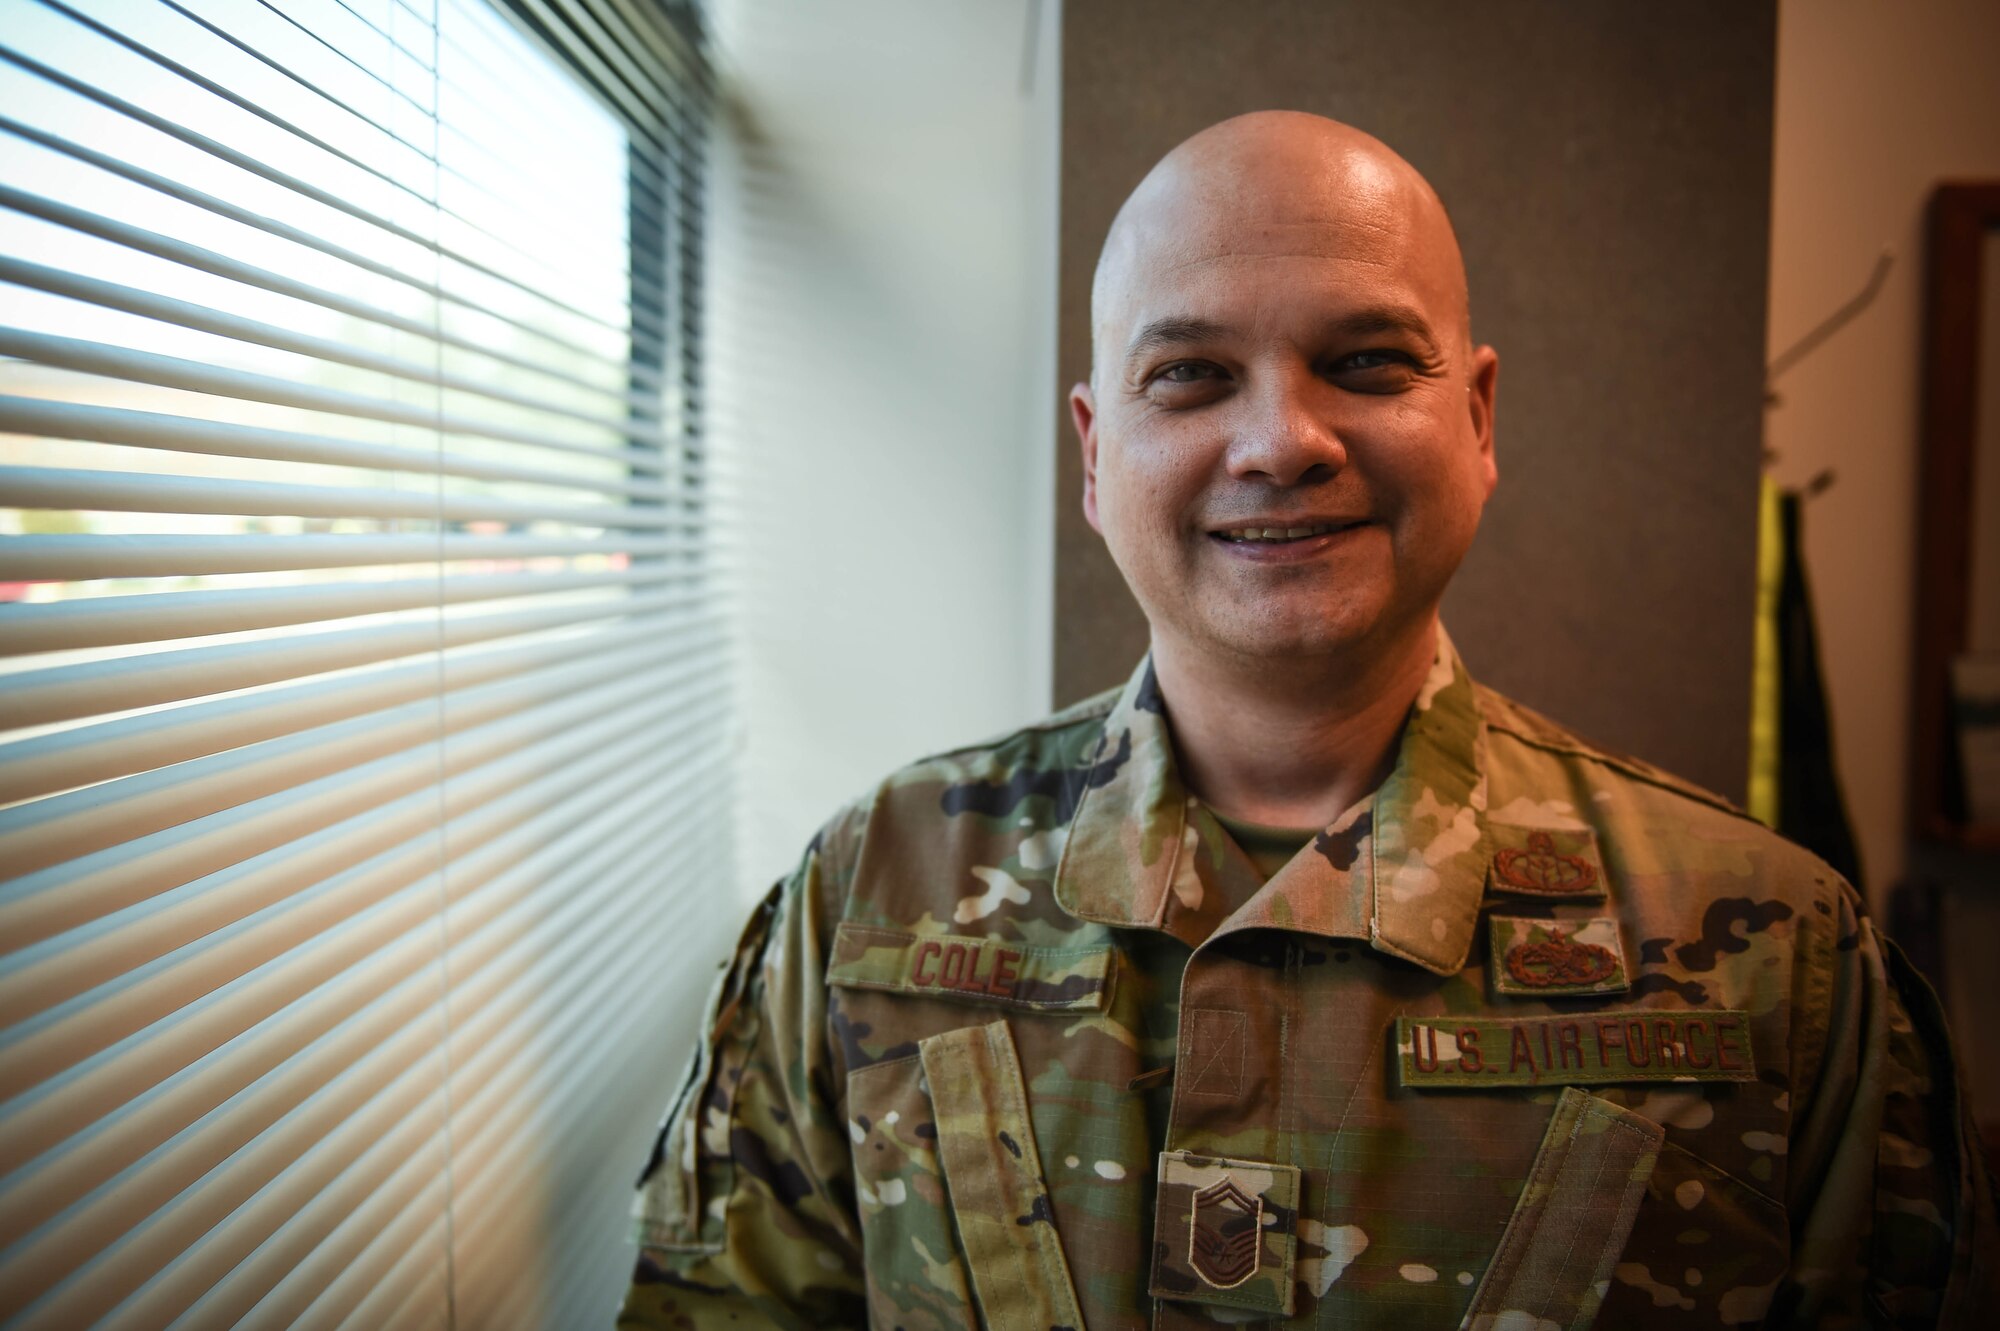 Senior Master Sgt. Samuel Cole, 62nd Operations Support Squadron superintendent, poses for a photo on Joint Base Lewis-McChord, Wash., Nov. 25, 2019. He was one of the ten McChord Airmen selected this year for promotion to chief master sergeant, the highest enlisted rank in the Air Force. 

“It is a huge honor and a privilege to be selected for this promotion and I intend to continue taking care of my people and aim toward affecting change.
A good piece of mentorship that I received was to focus more on being effective and less on being right in most situations that you encounter.
Chief master sergeant it is a great milestone and I will work hard to live up to the honor and take care of the Airmen of which I am charged.”

(U.S. Air Force photo by Airman 1st Class Mikayla Heineck)